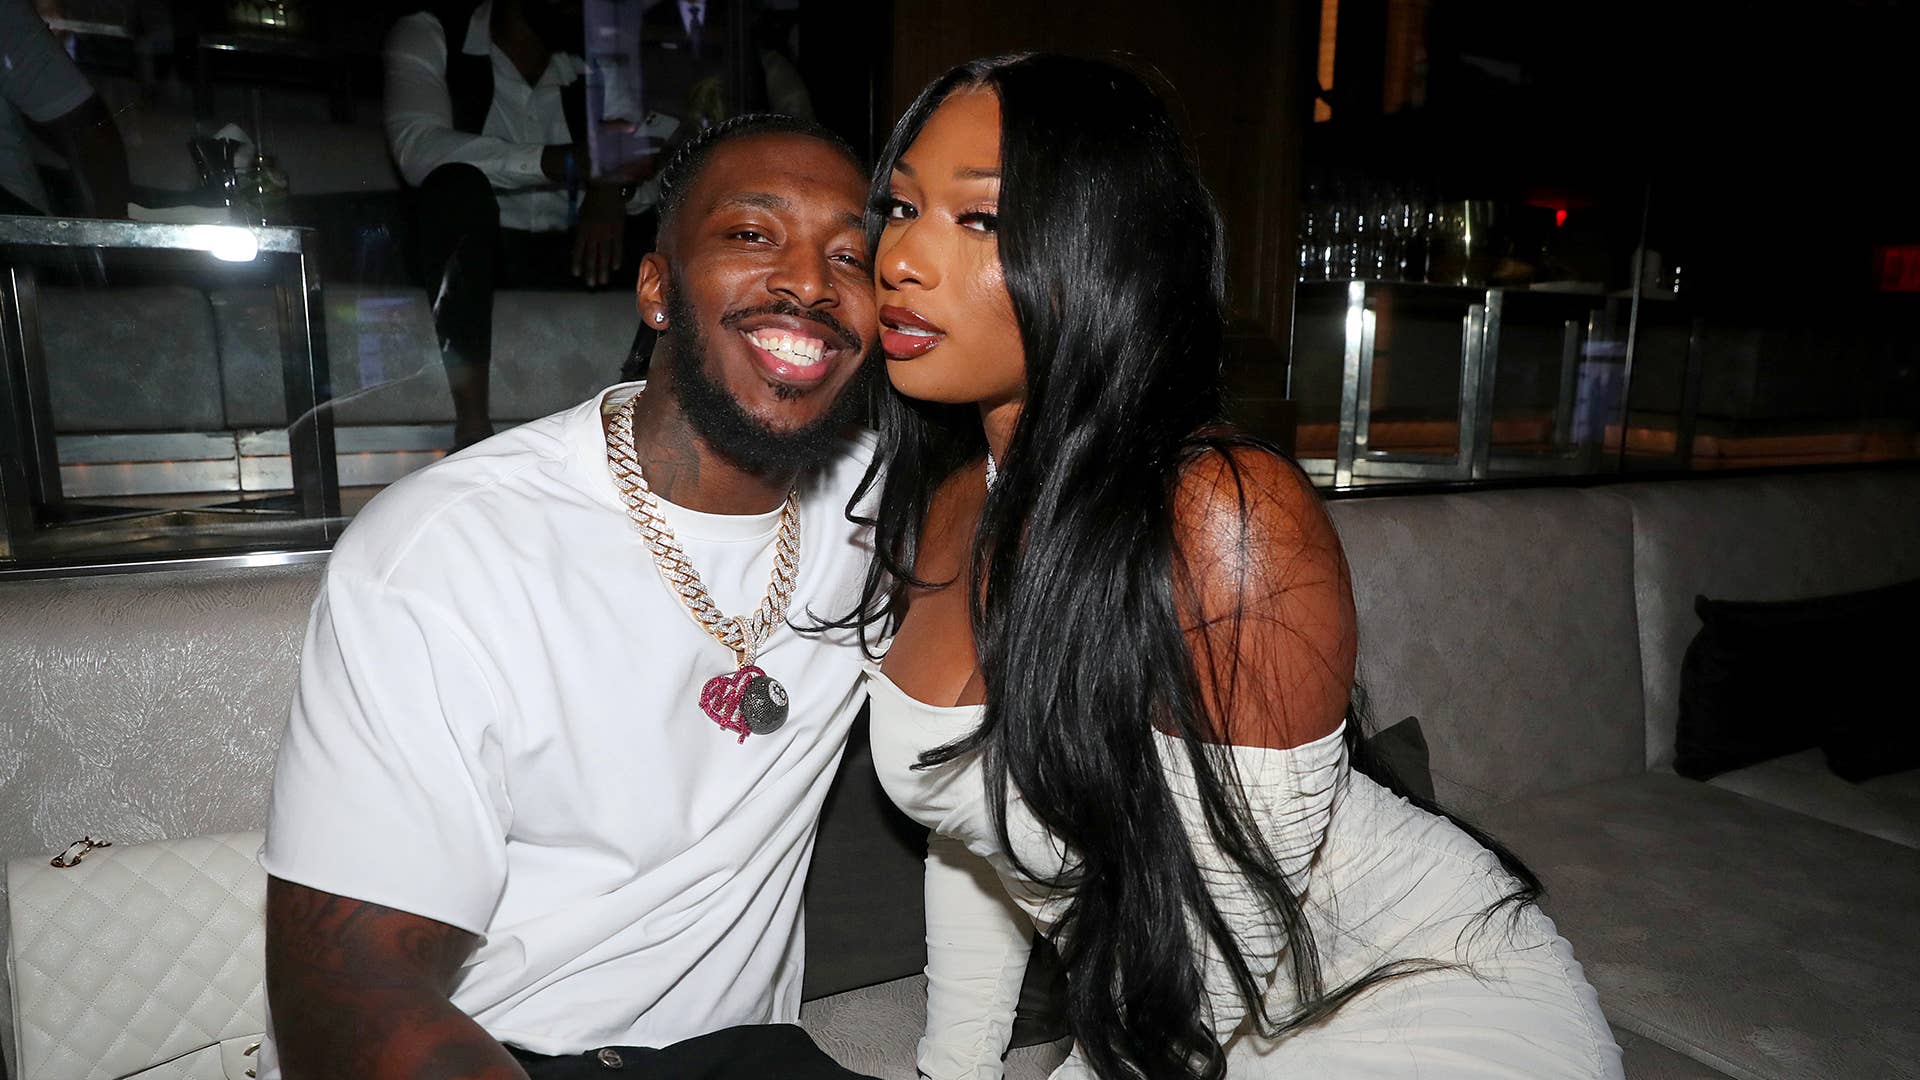 Pardison "Pardi" Fontaine and Megan Thee Stallion attend Jay Z's 40/40 Club